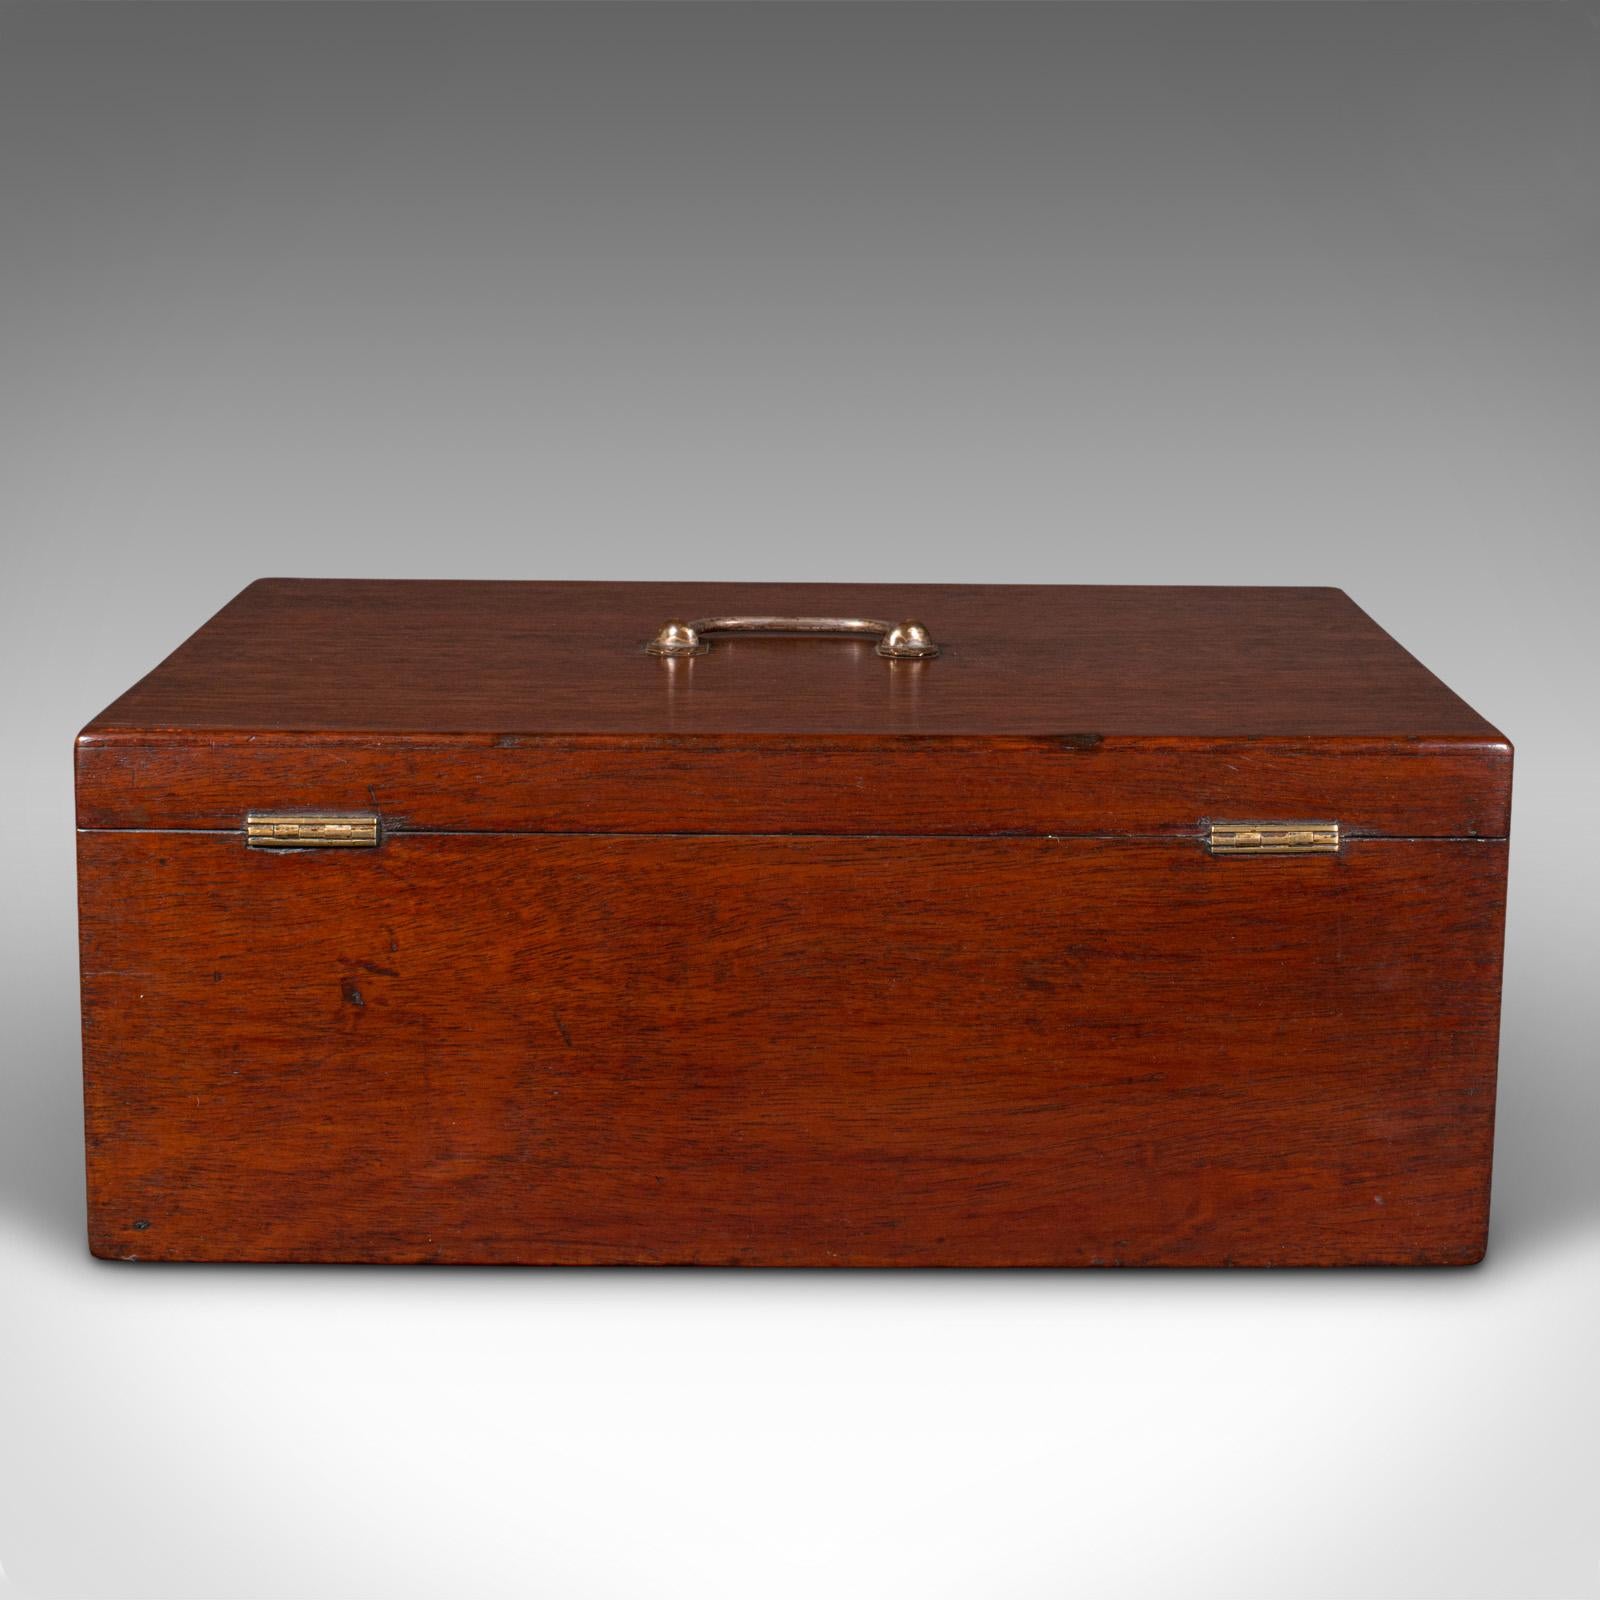 British Antique Travelling Jewellery Salesman's Box, English Carry Case, Victorian, 1850 For Sale